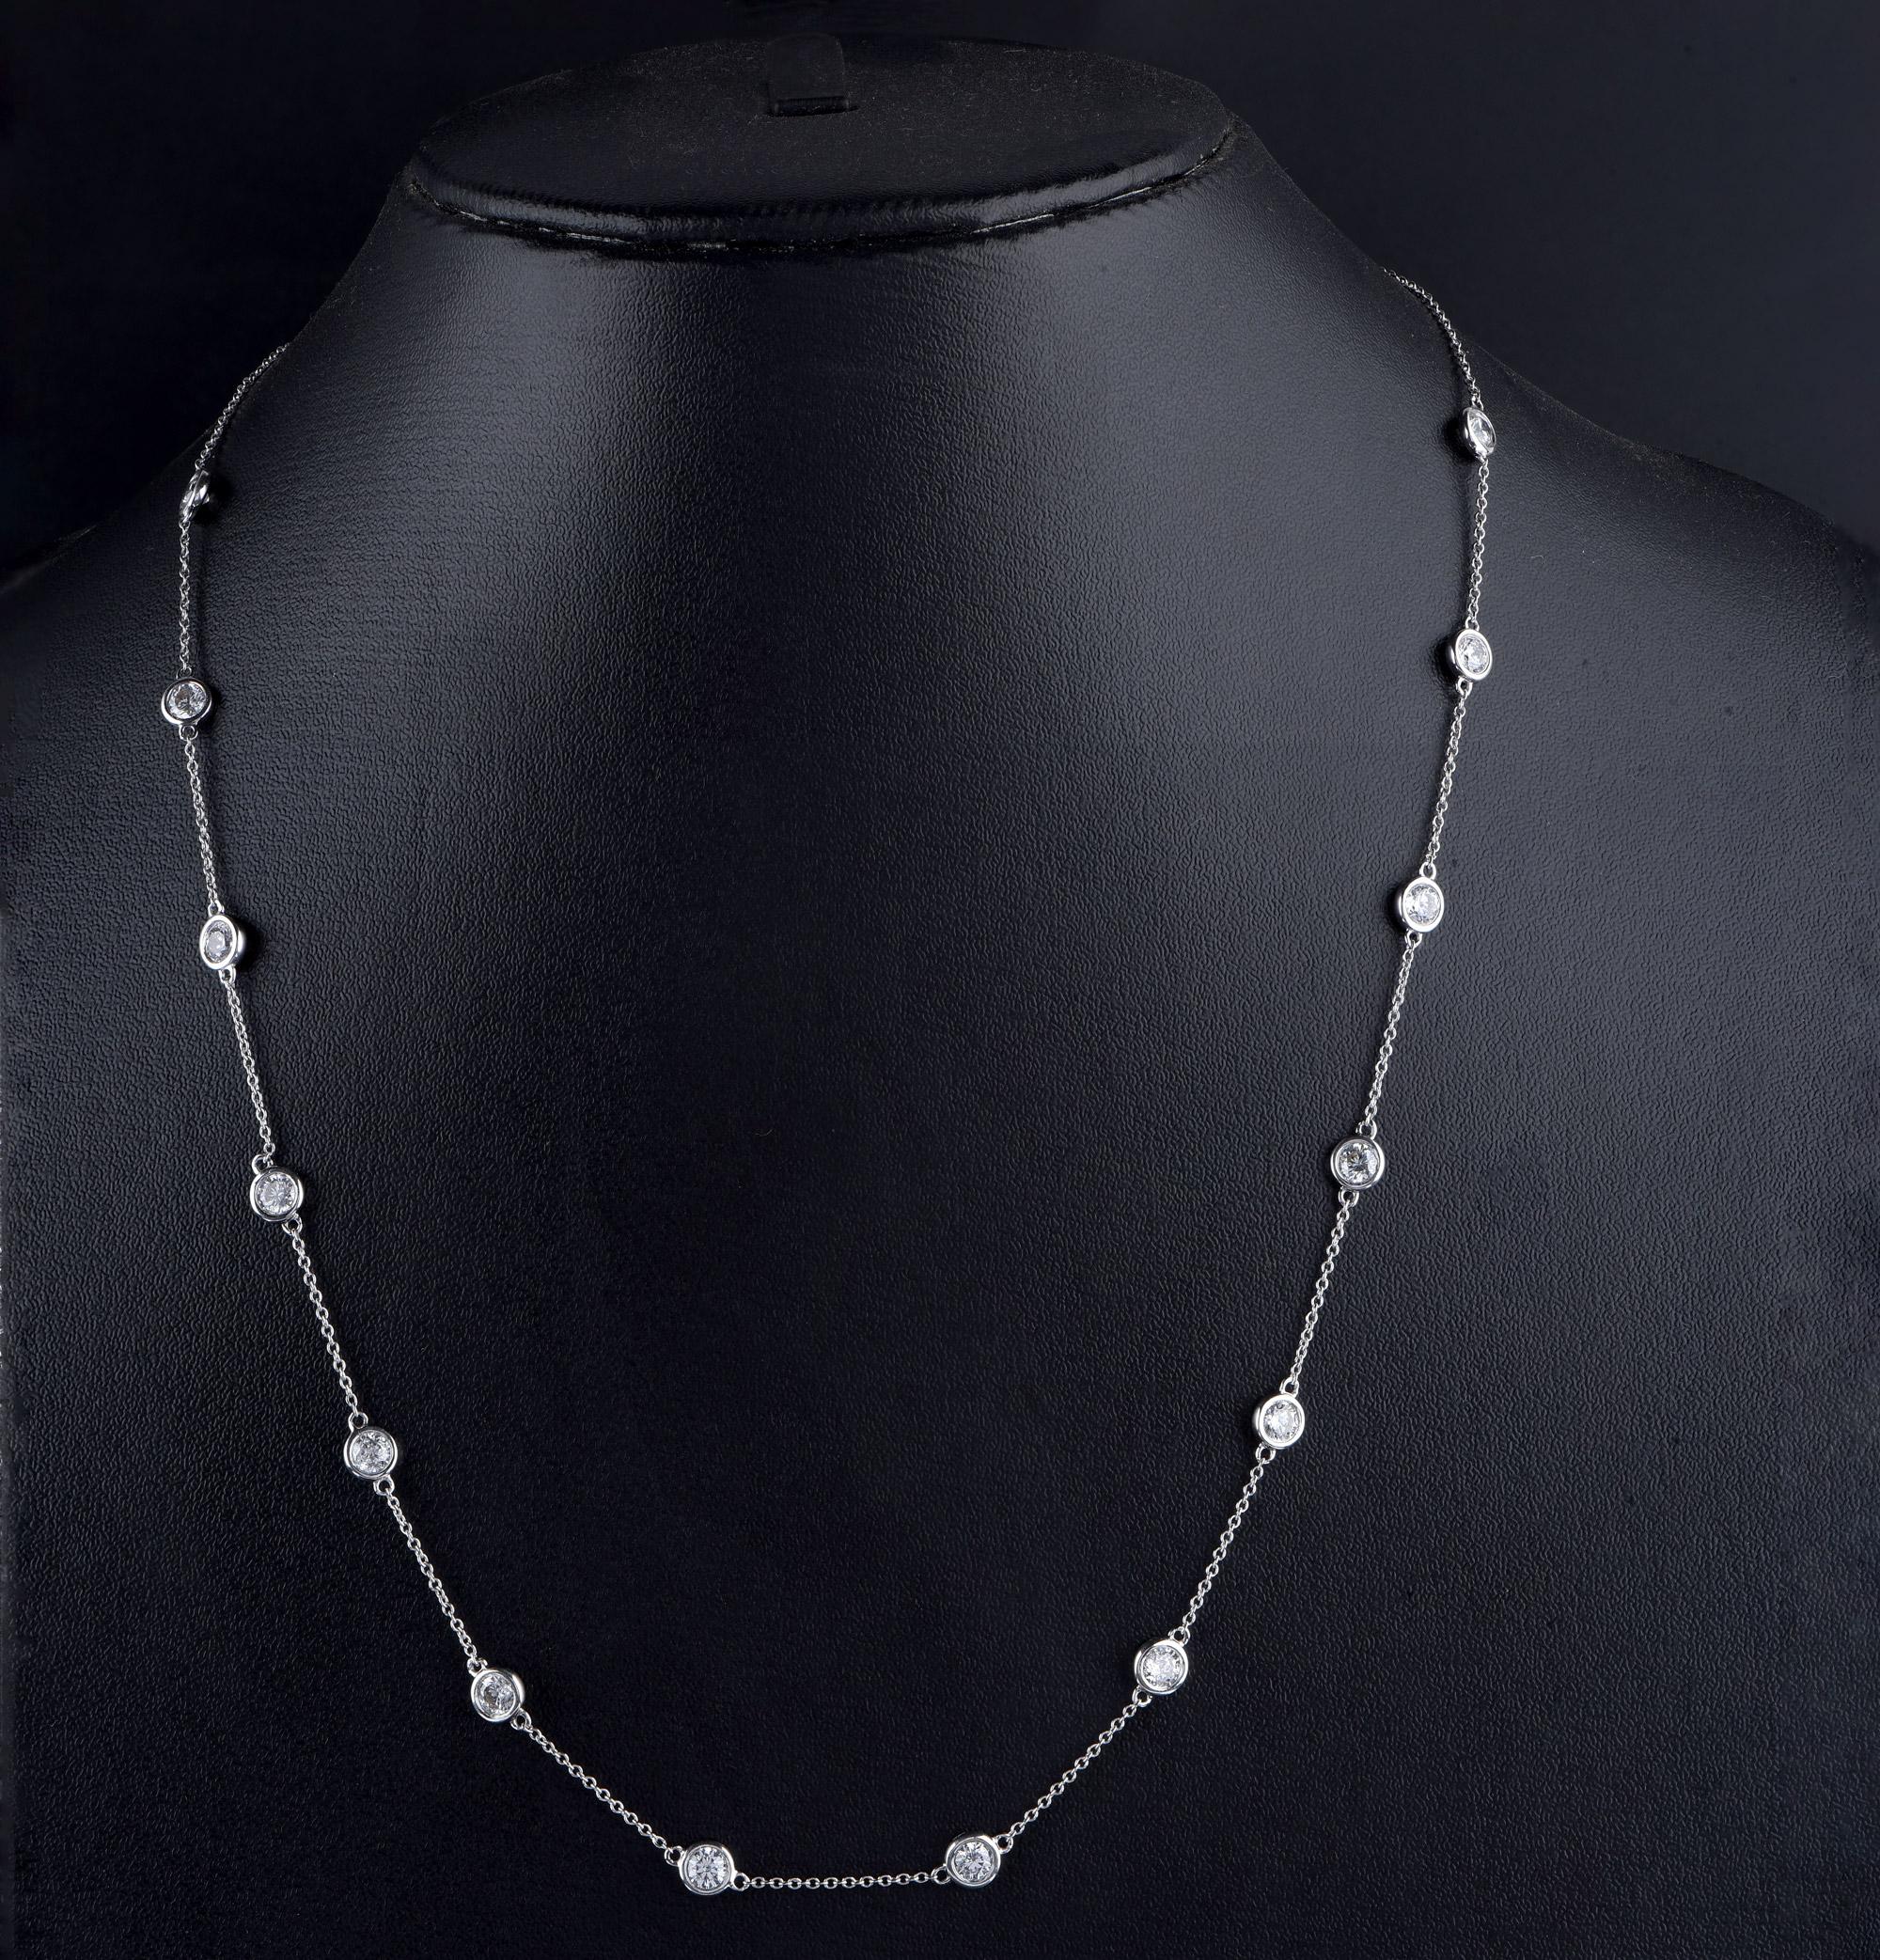 Elegantly designed with 14 brilliant cut diamonds beautifully set in bezel setting and made by our skillful craftsmen in 14-karat white gold. The diamonds are graded HI Colour, I2 Clarity. The length of the cable chain necklace is 18 inches.